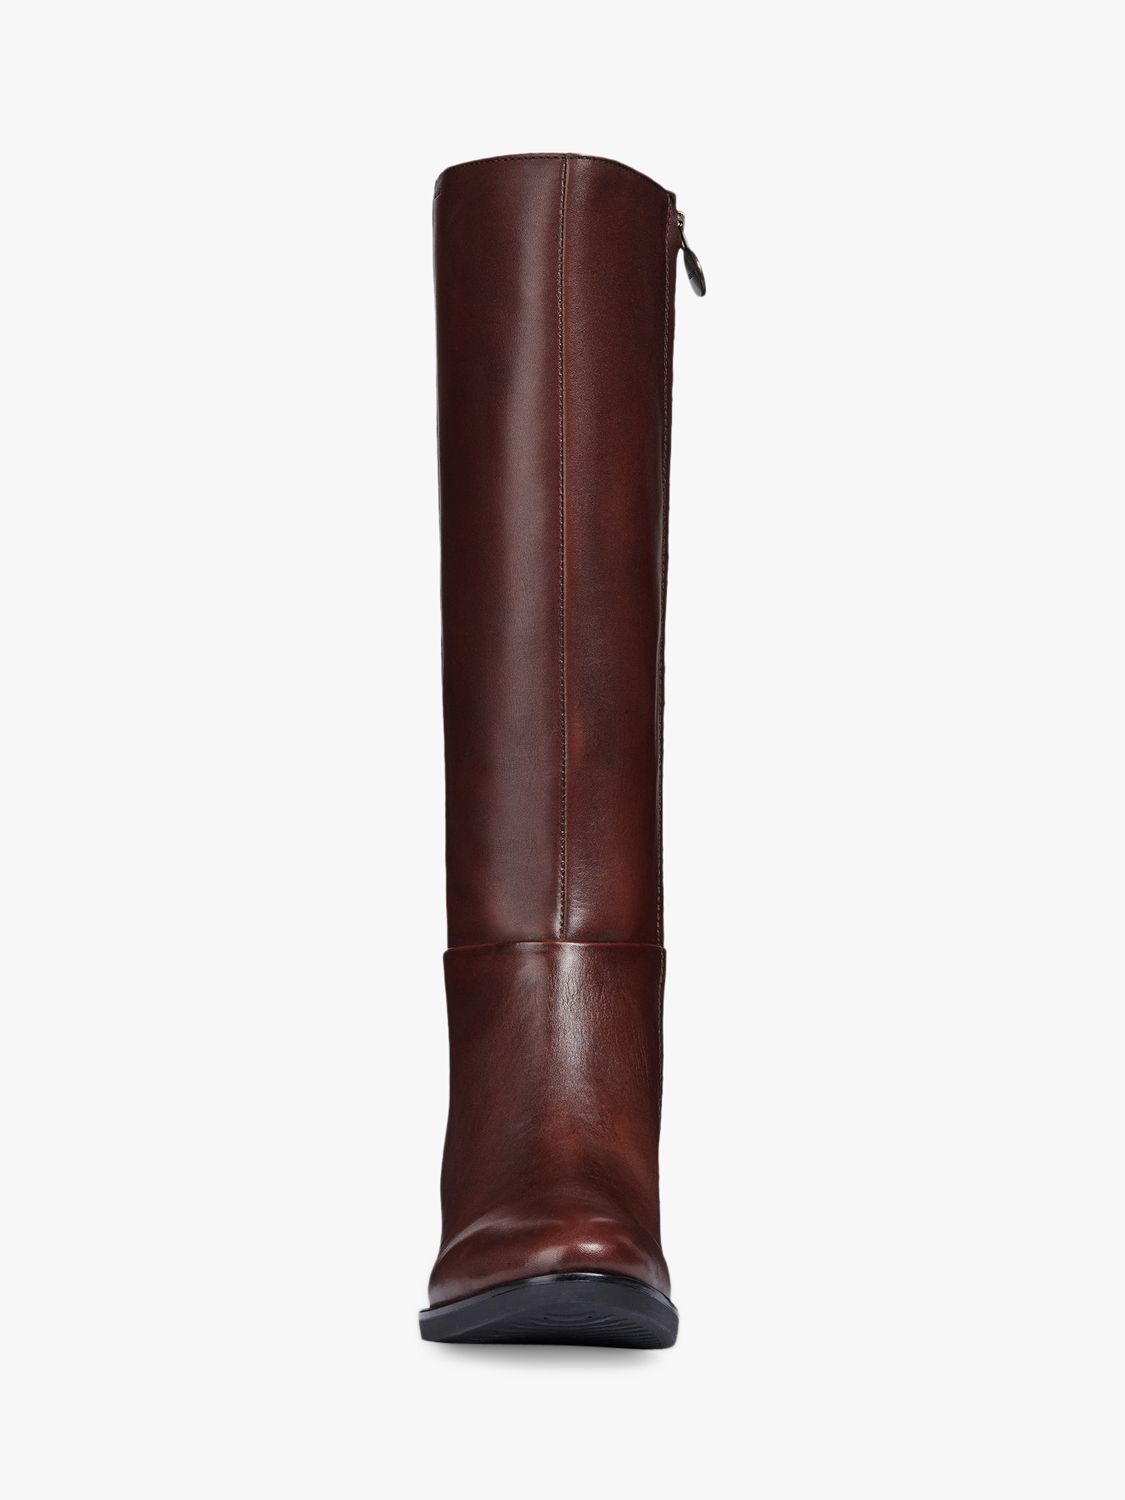 Nabo Chaise longue rival Geox Women's Felicity Leather Heeled Knee High Boots, Brown at John Lewis &  Partners